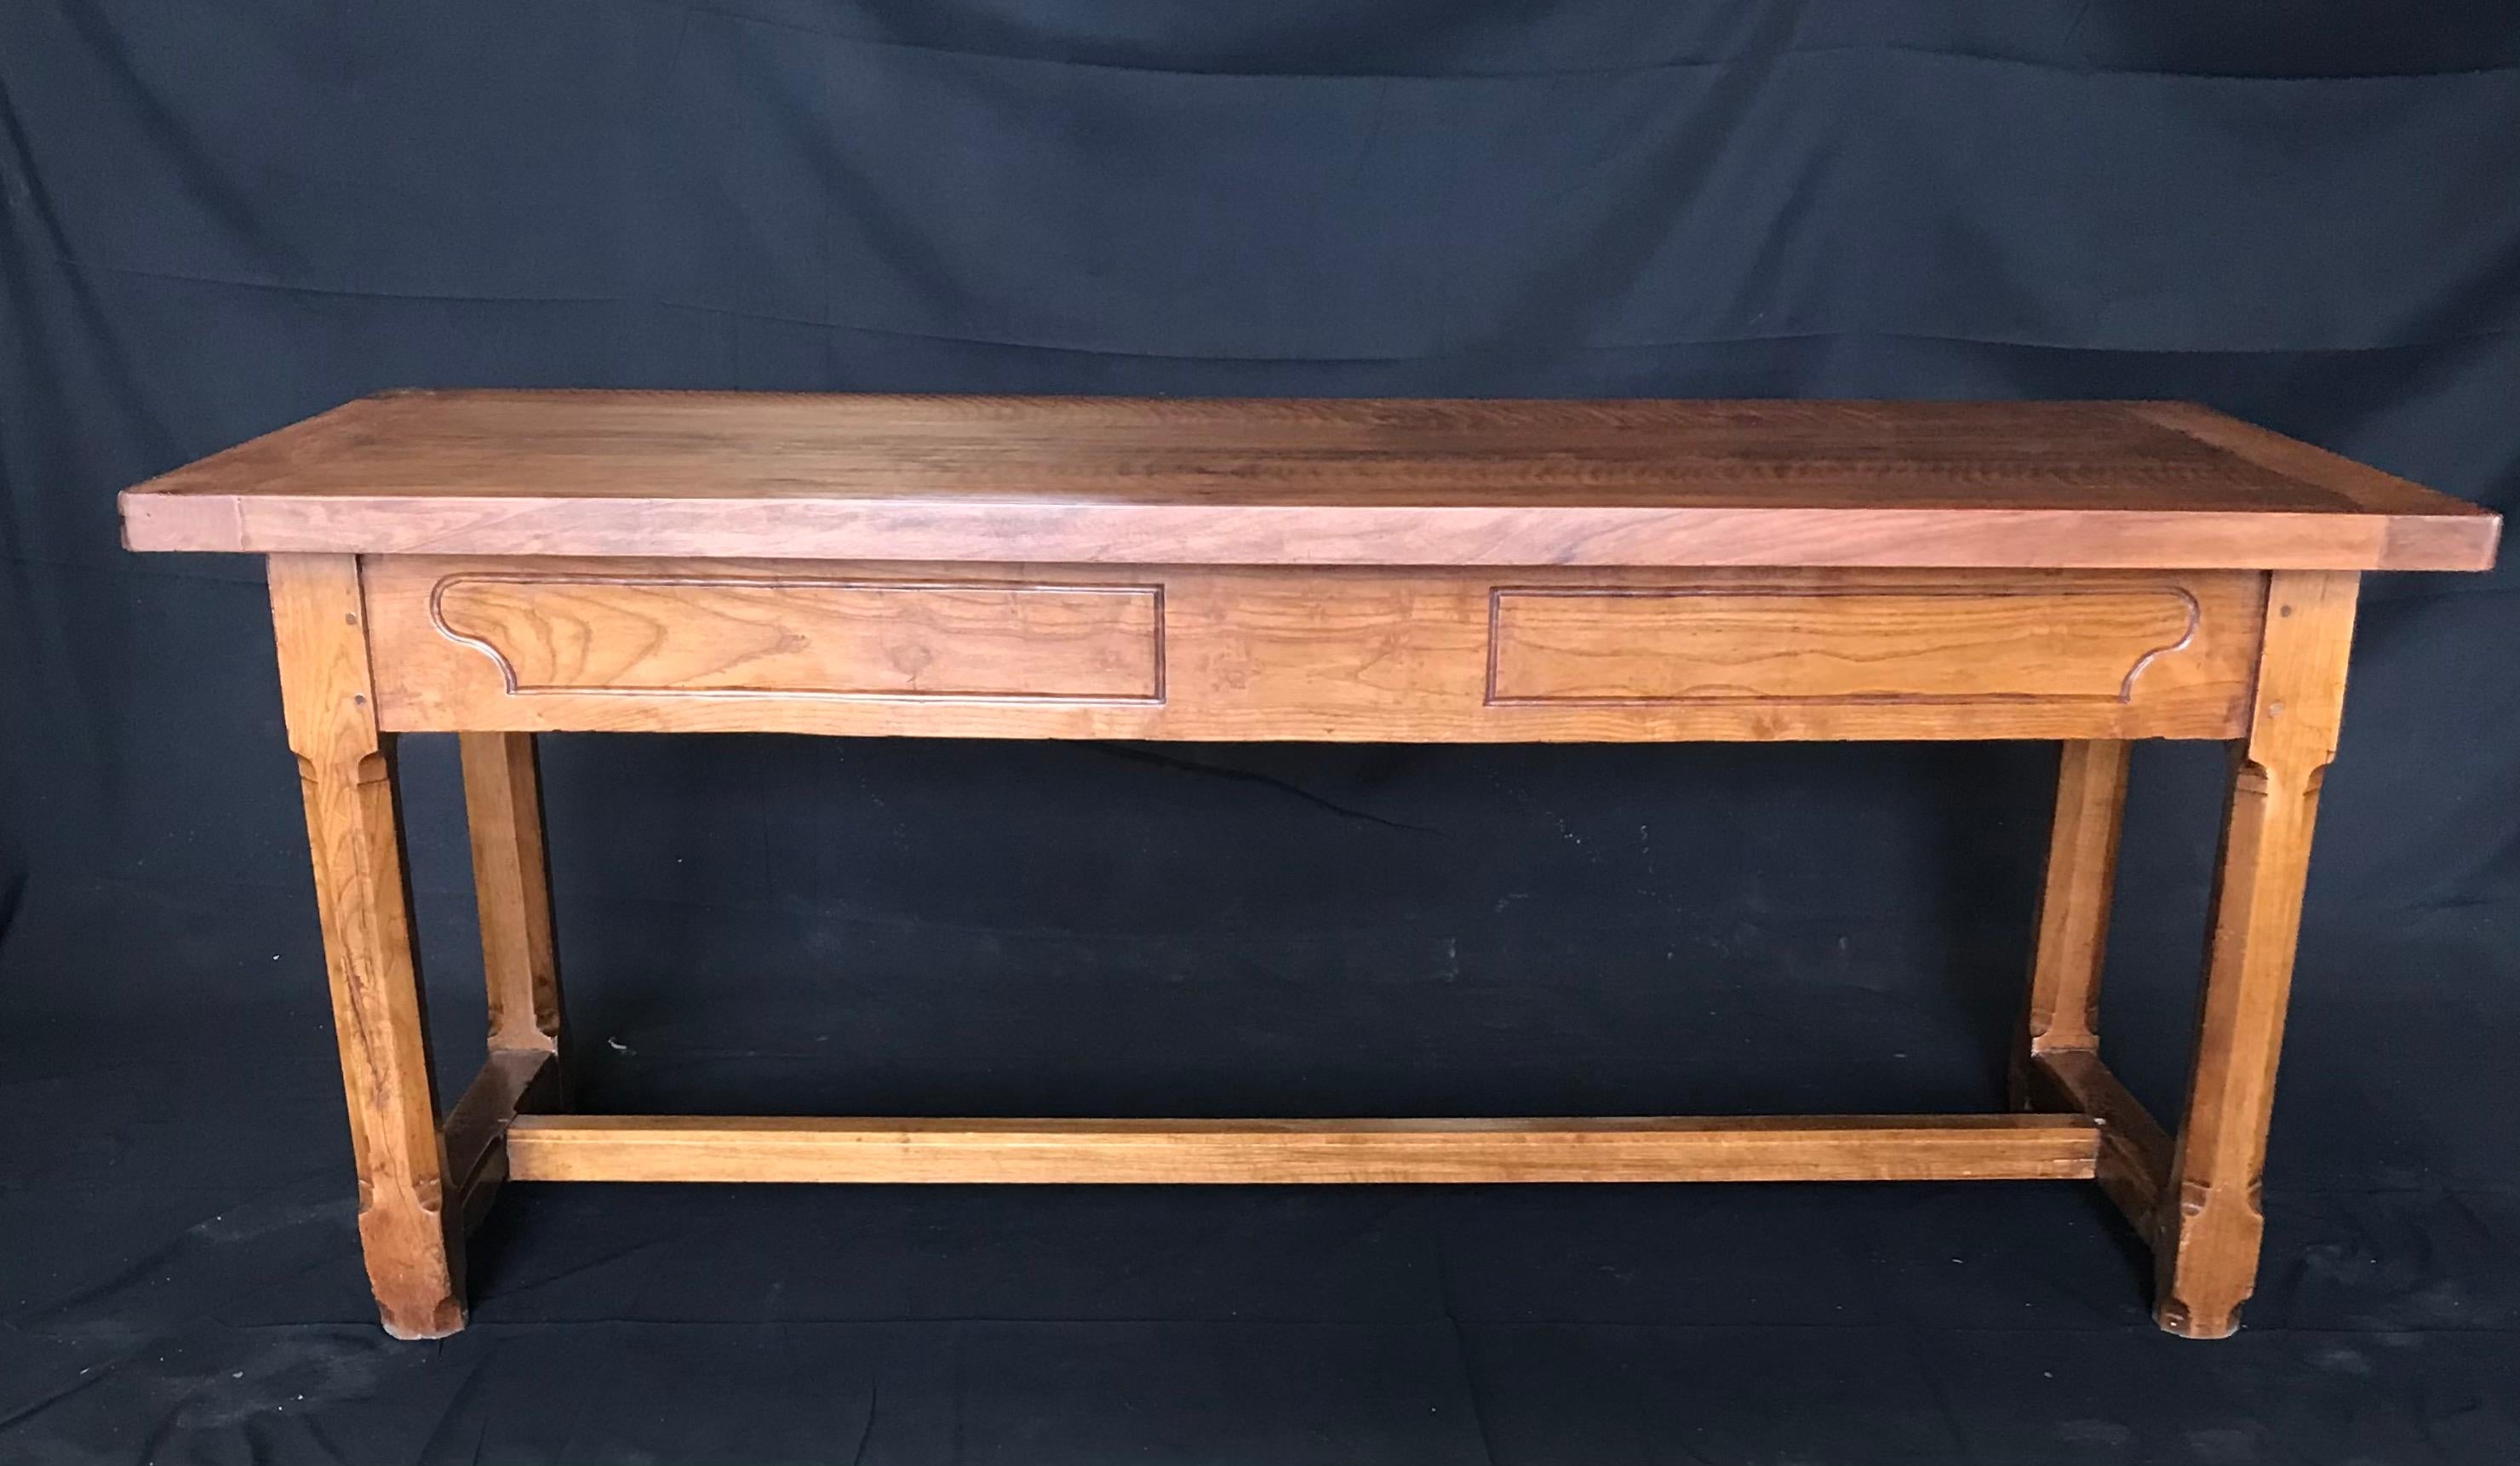 An uncommonly fine traditional antique cherry French farm dining table with bread board top and center drawer with sliding side drawers that provide maximum storage. Carved square legs under beveled apron, exposed peg construction, all sides and